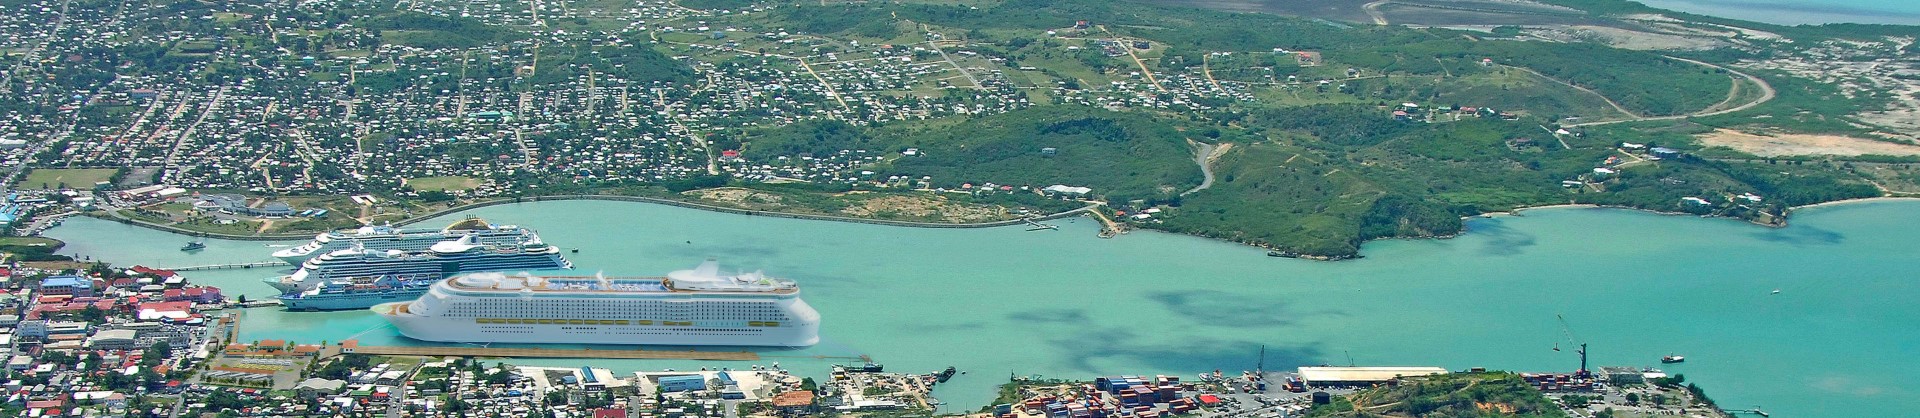 Your Port, Your Destination in the Caribbean